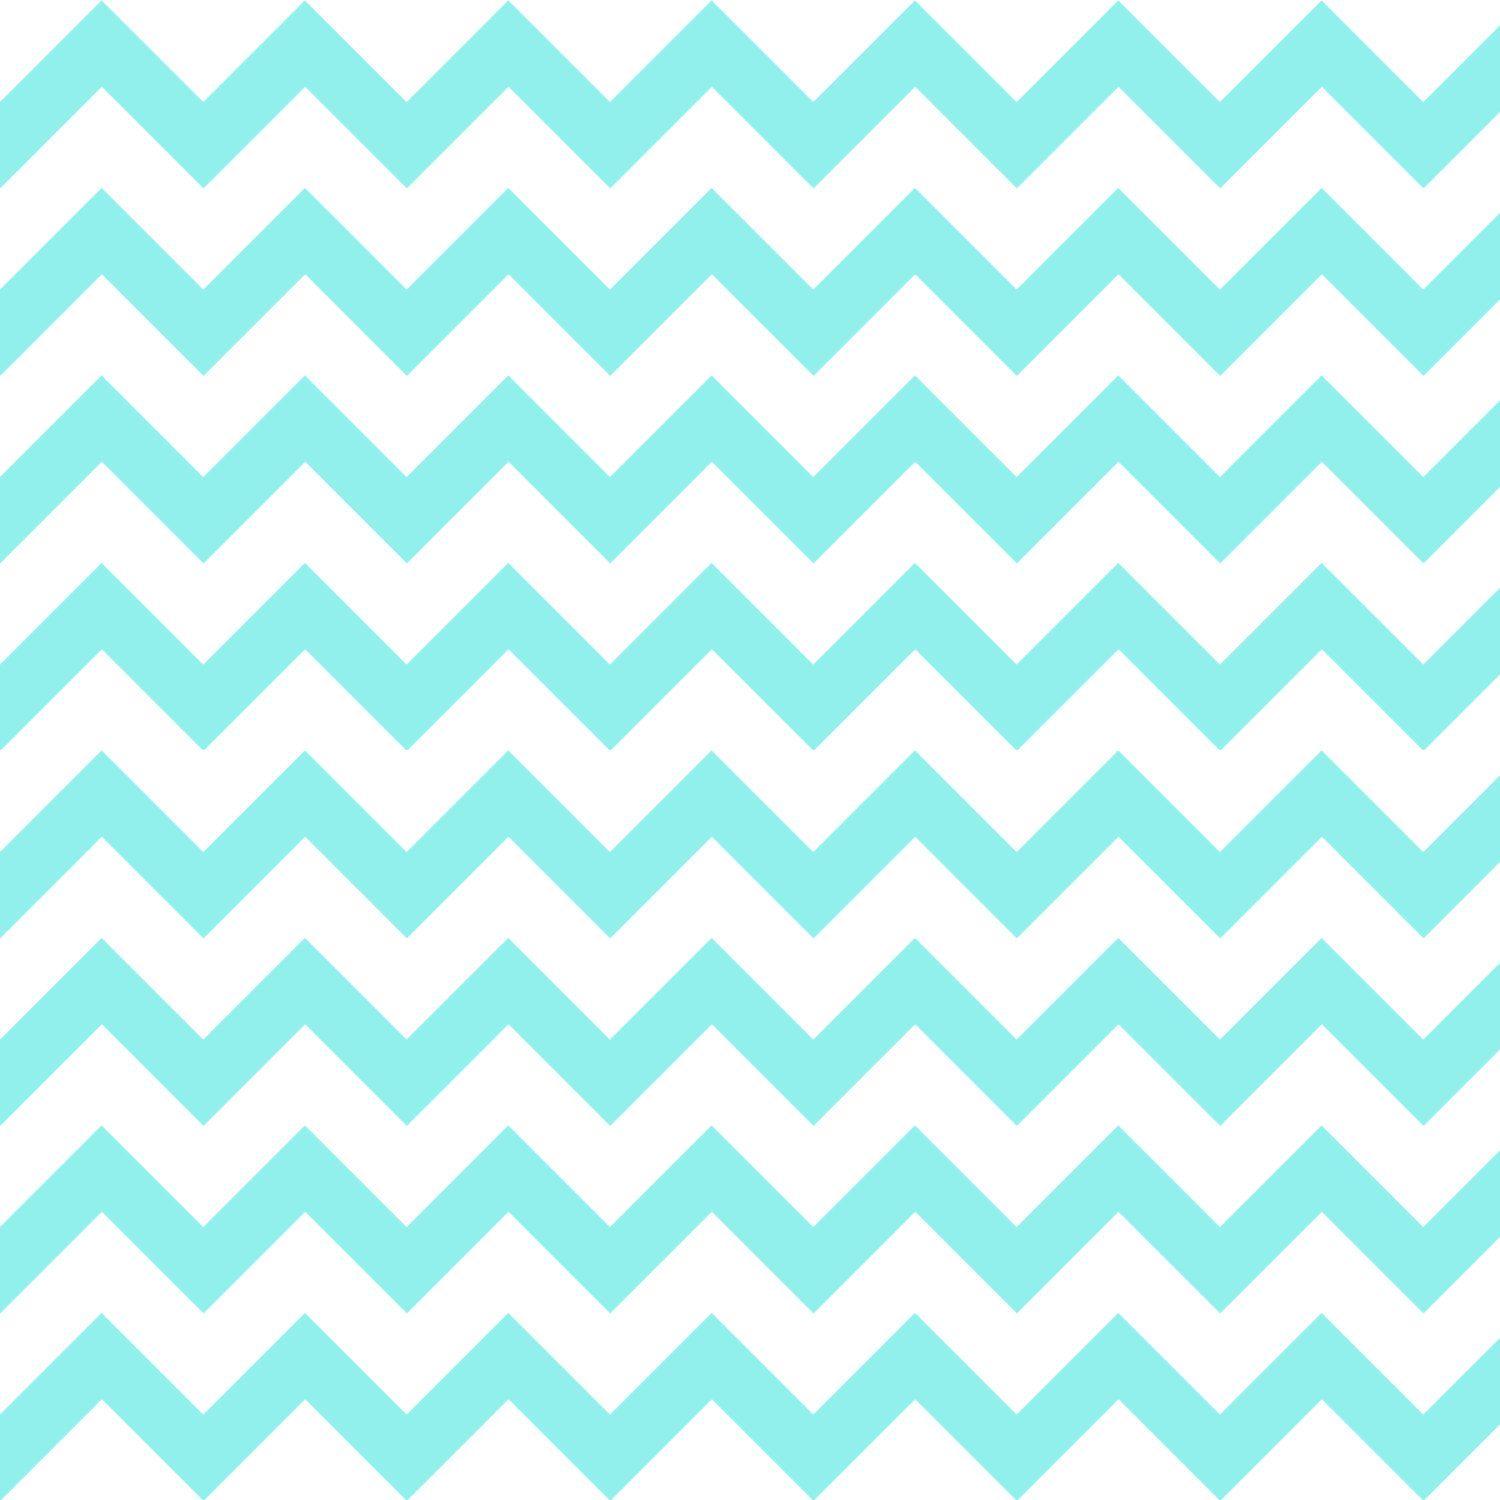 Blue Chevron Wallpaper Images Browse 82202 Stock Photos  Vectors Free  Download with Trial  Shutterstock